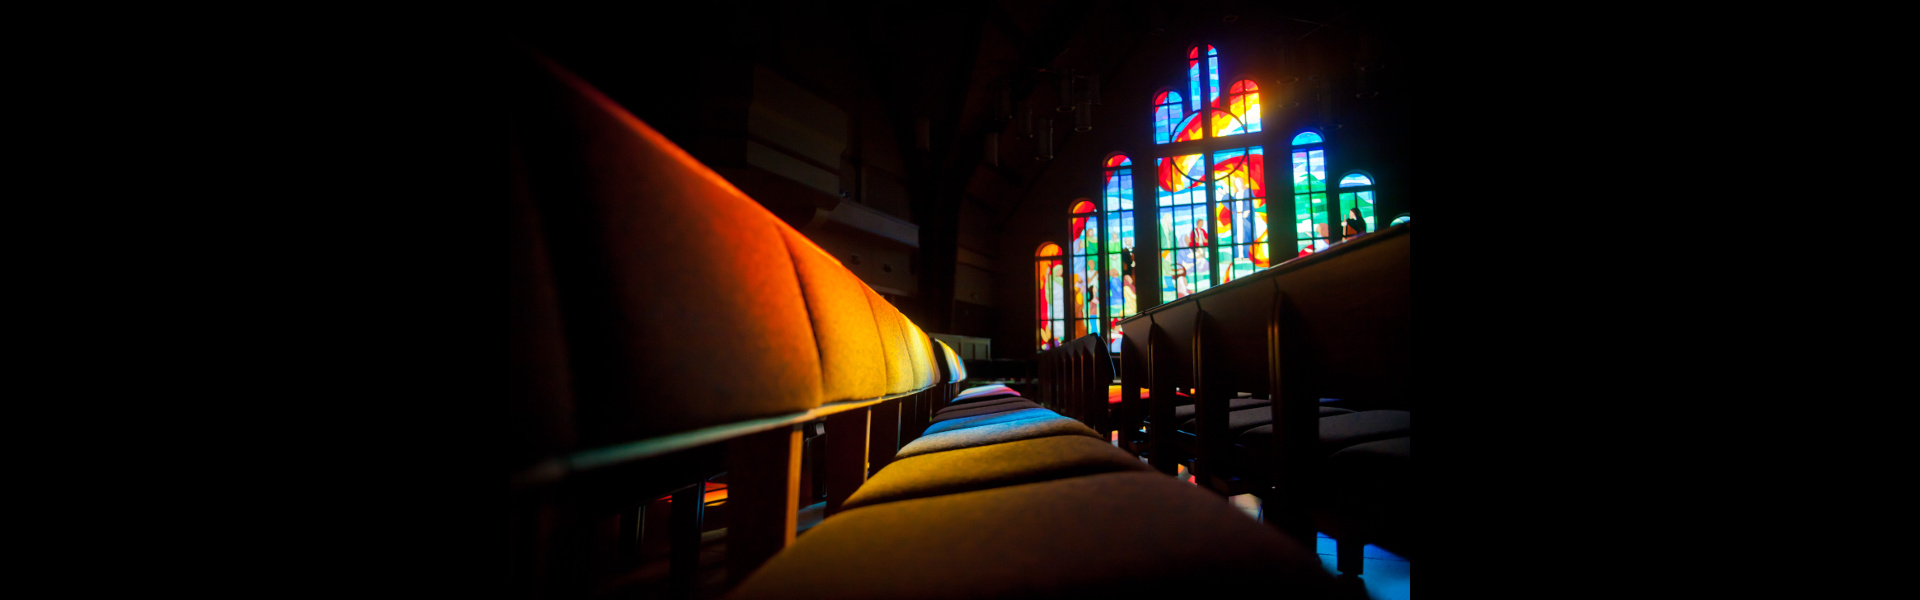 Light shining through the stained glass windows in the Chapel sanctuary